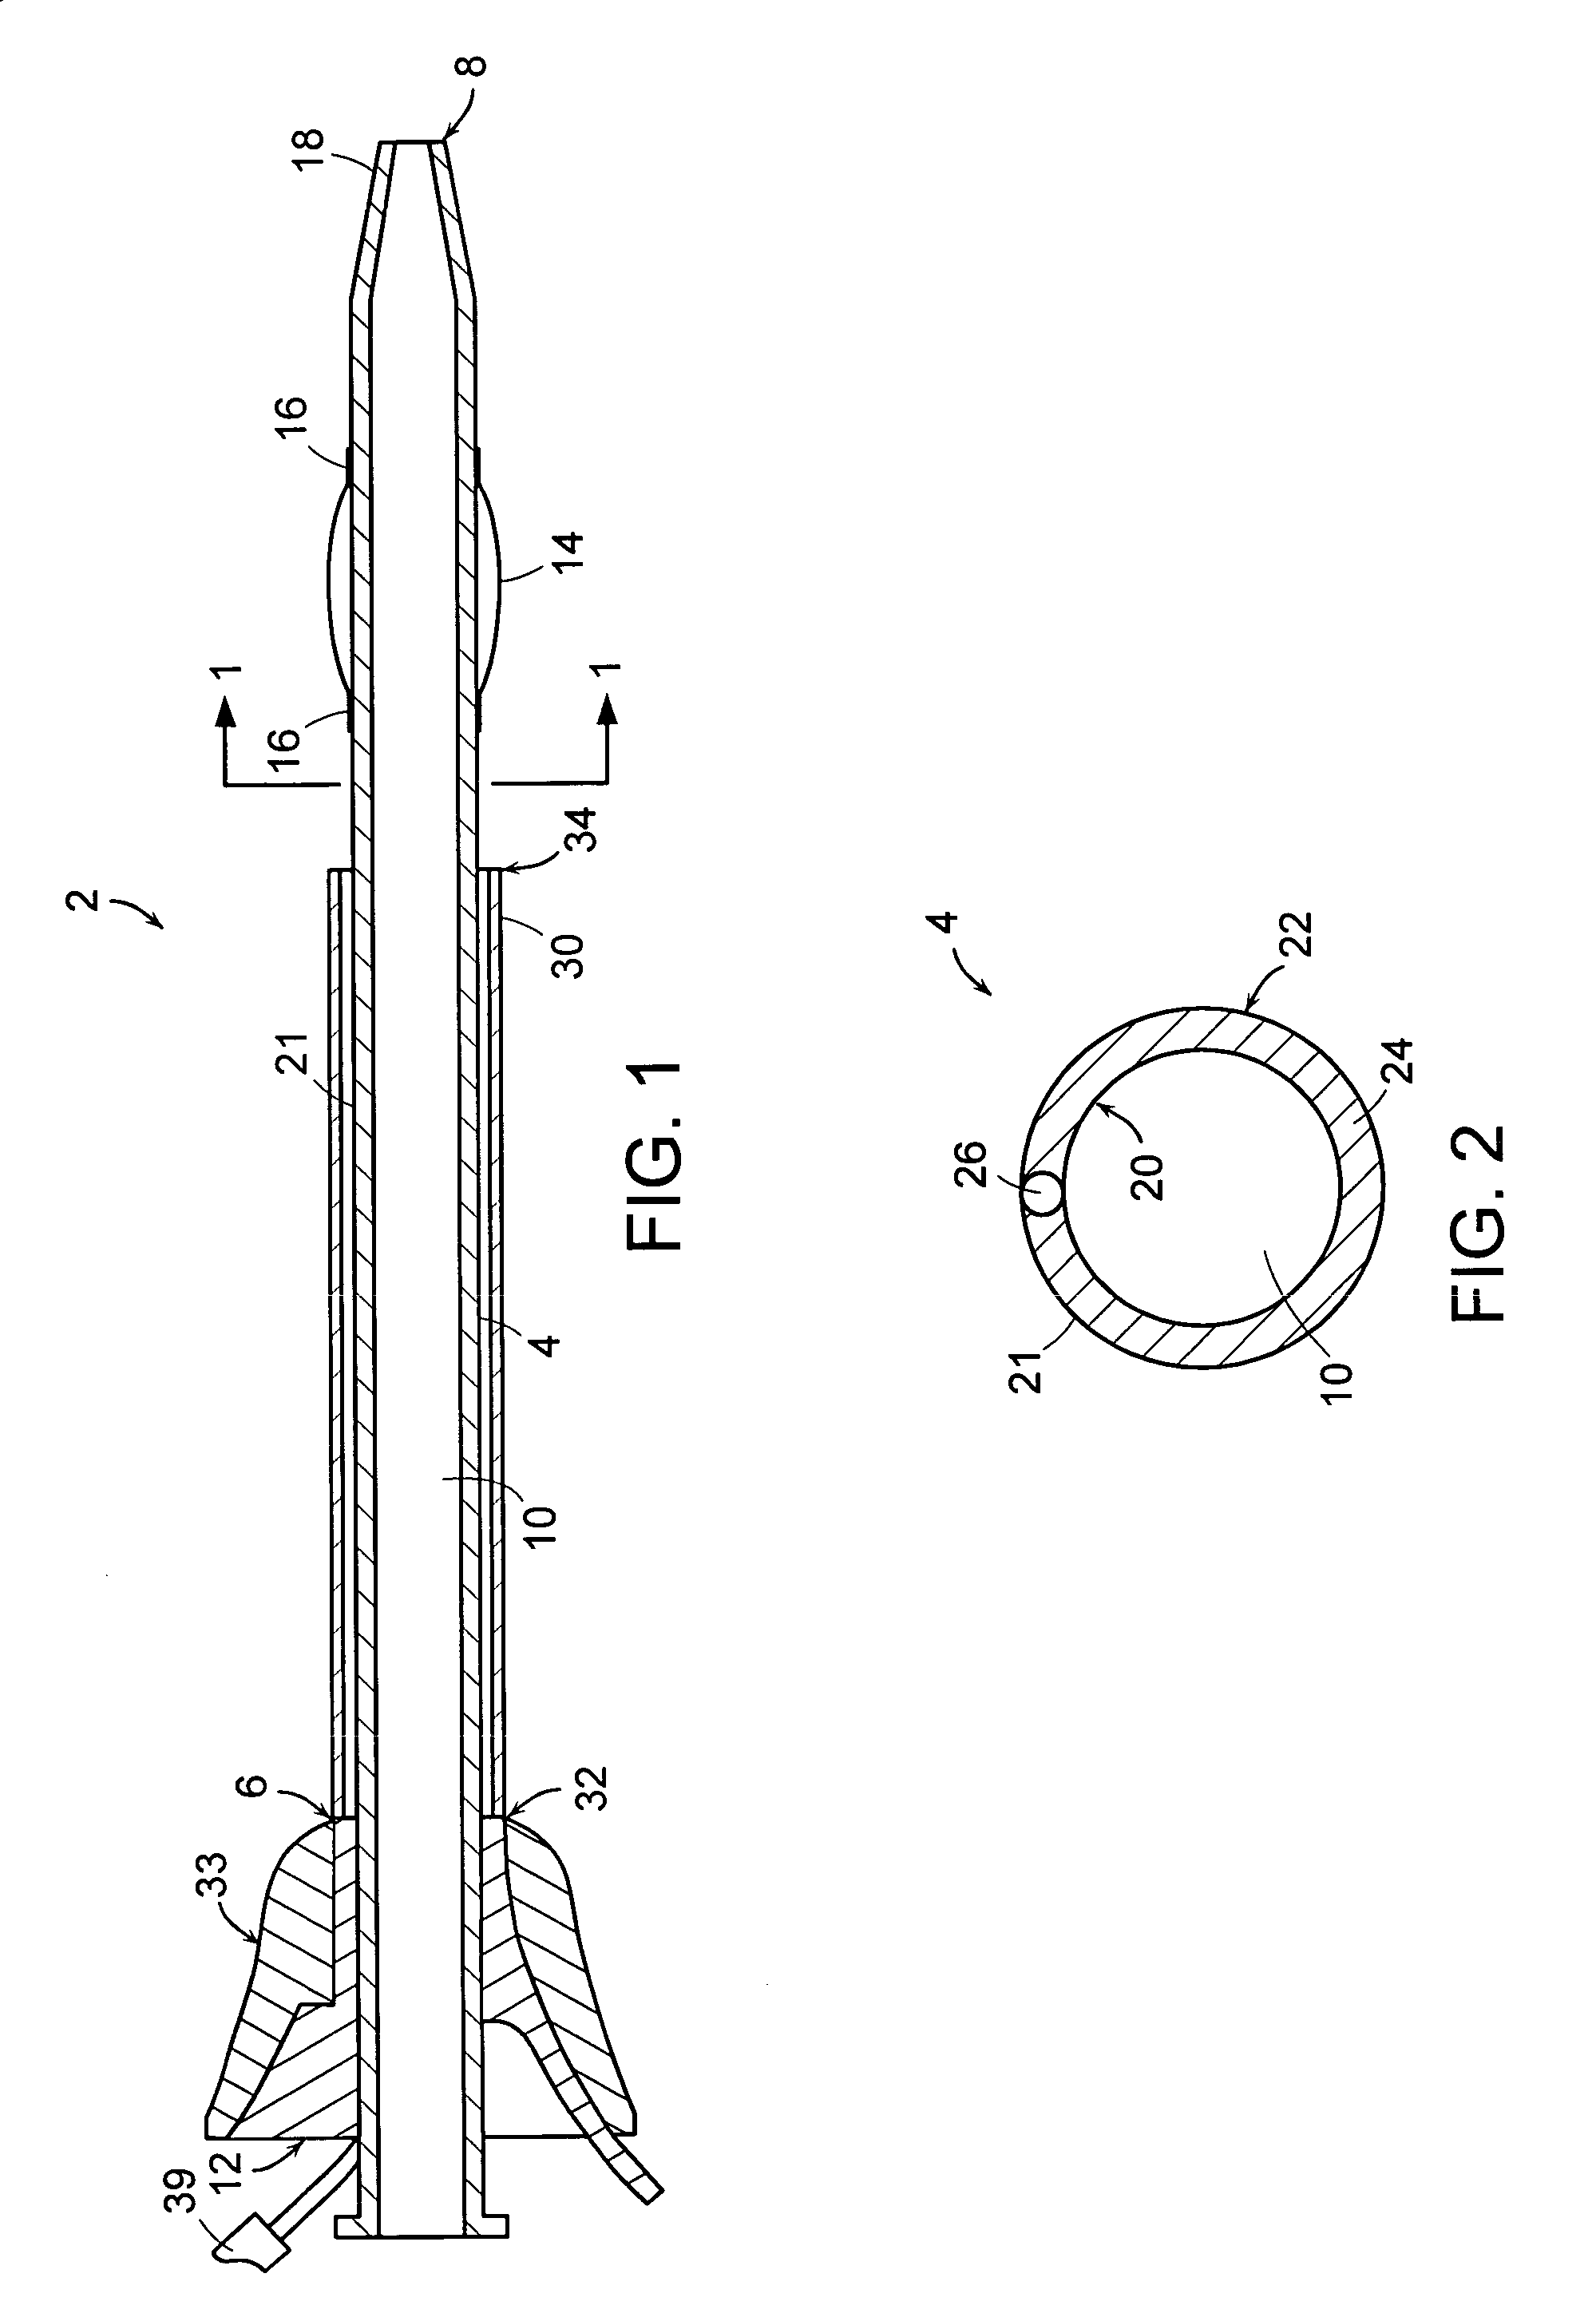 Dilator with expandable member